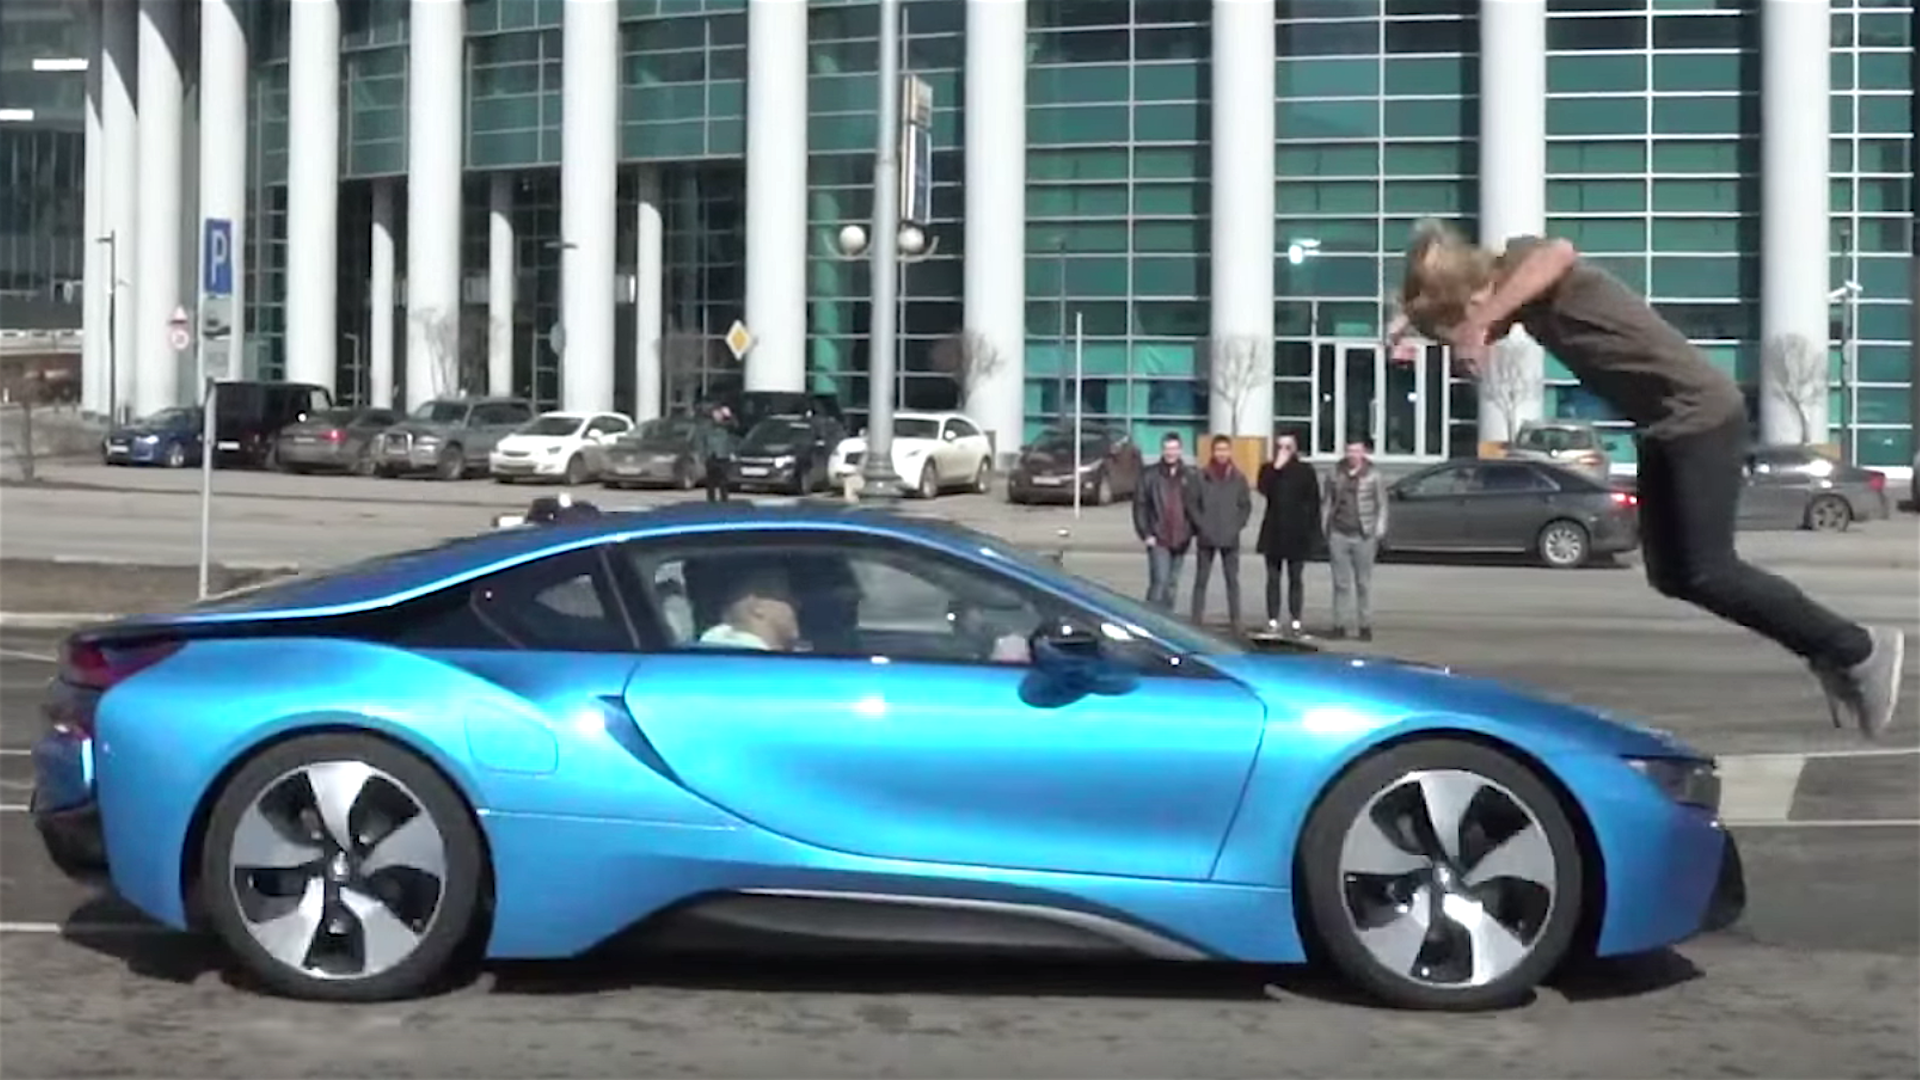 Watch a Stunt Man Leap Over a BMW i8 Doing 60 MPH